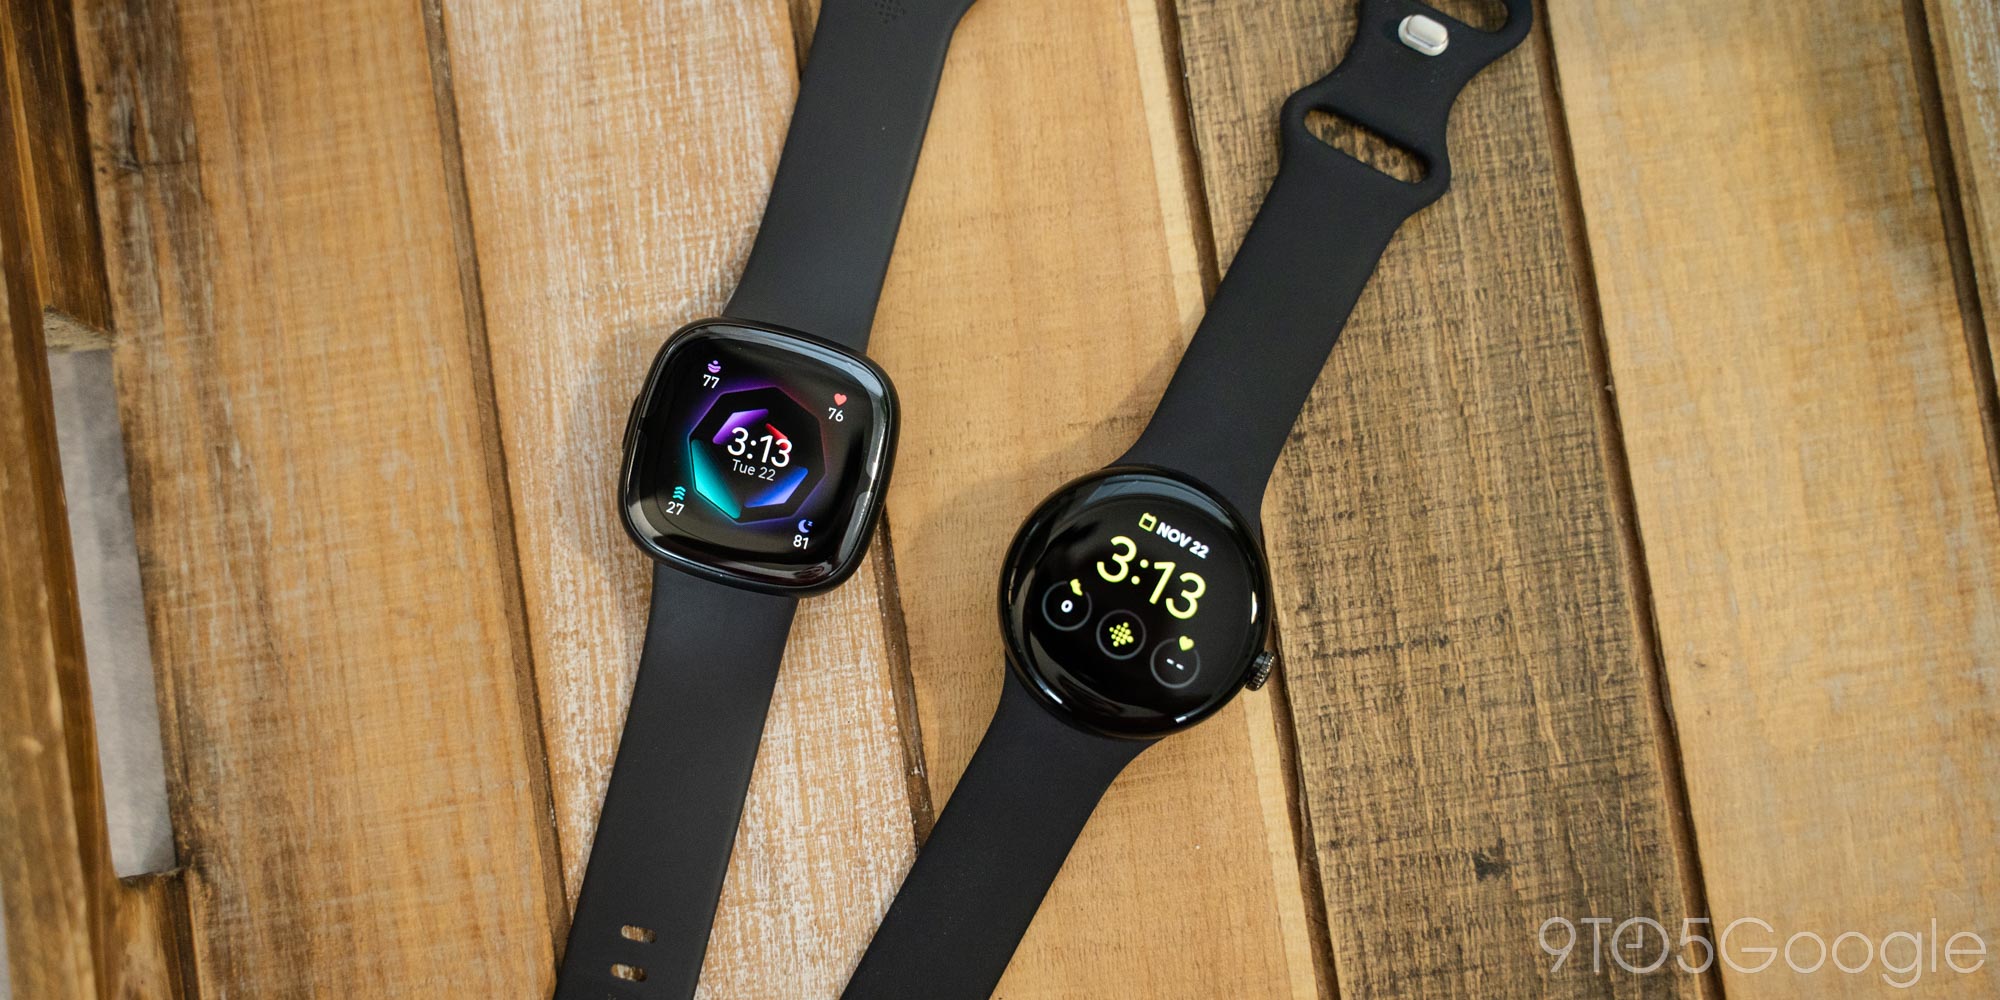 Act fast! The Apple Watch SE just crashed to lowest price ever at Amazon |  Tom's Guide